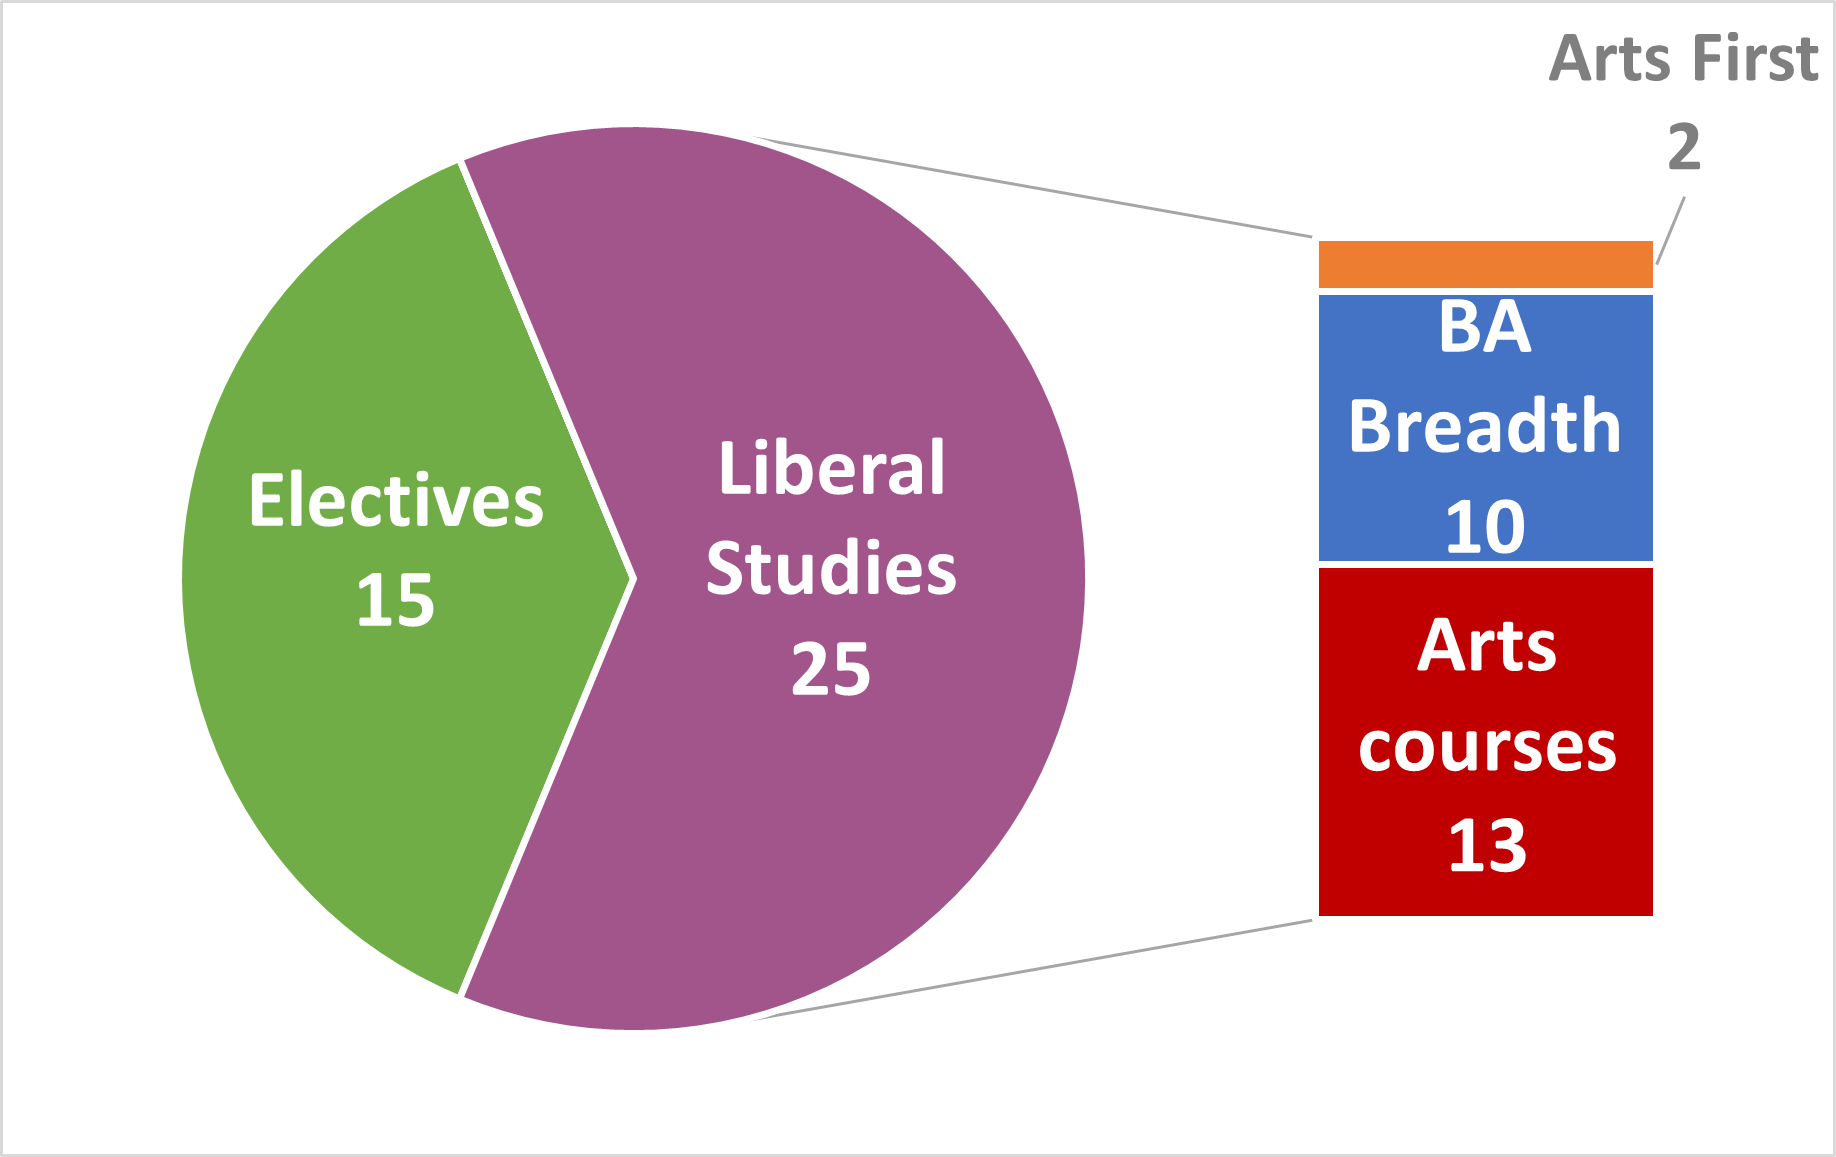 Pie graph displaying the components of an honours or four-year general BA degree in liberal studies: 15 electives and 25 liberal studies courses made up of 2 Arts First courses, 10 BA Breadth courses, and 13 unrestricted Arts courses.